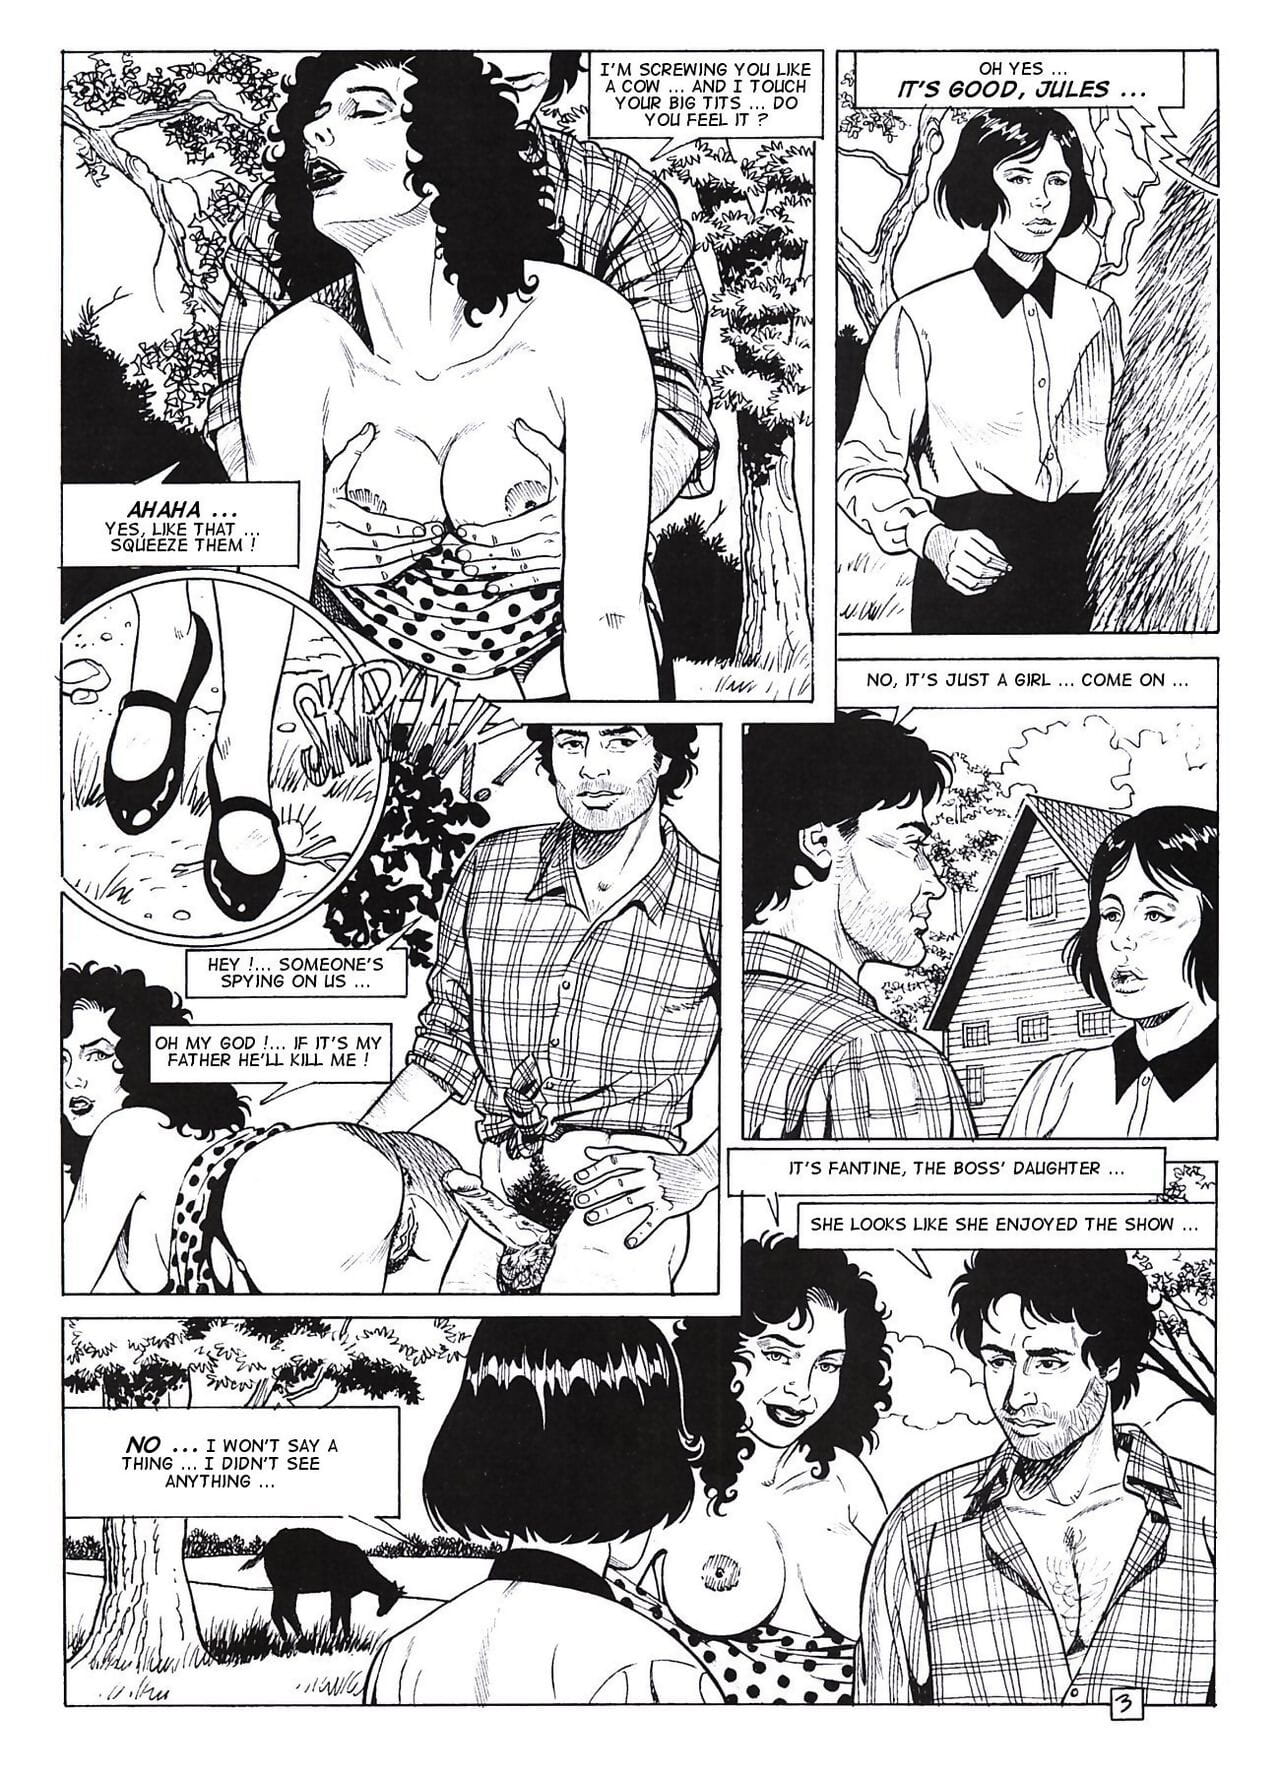 The Birches of Desire page 1